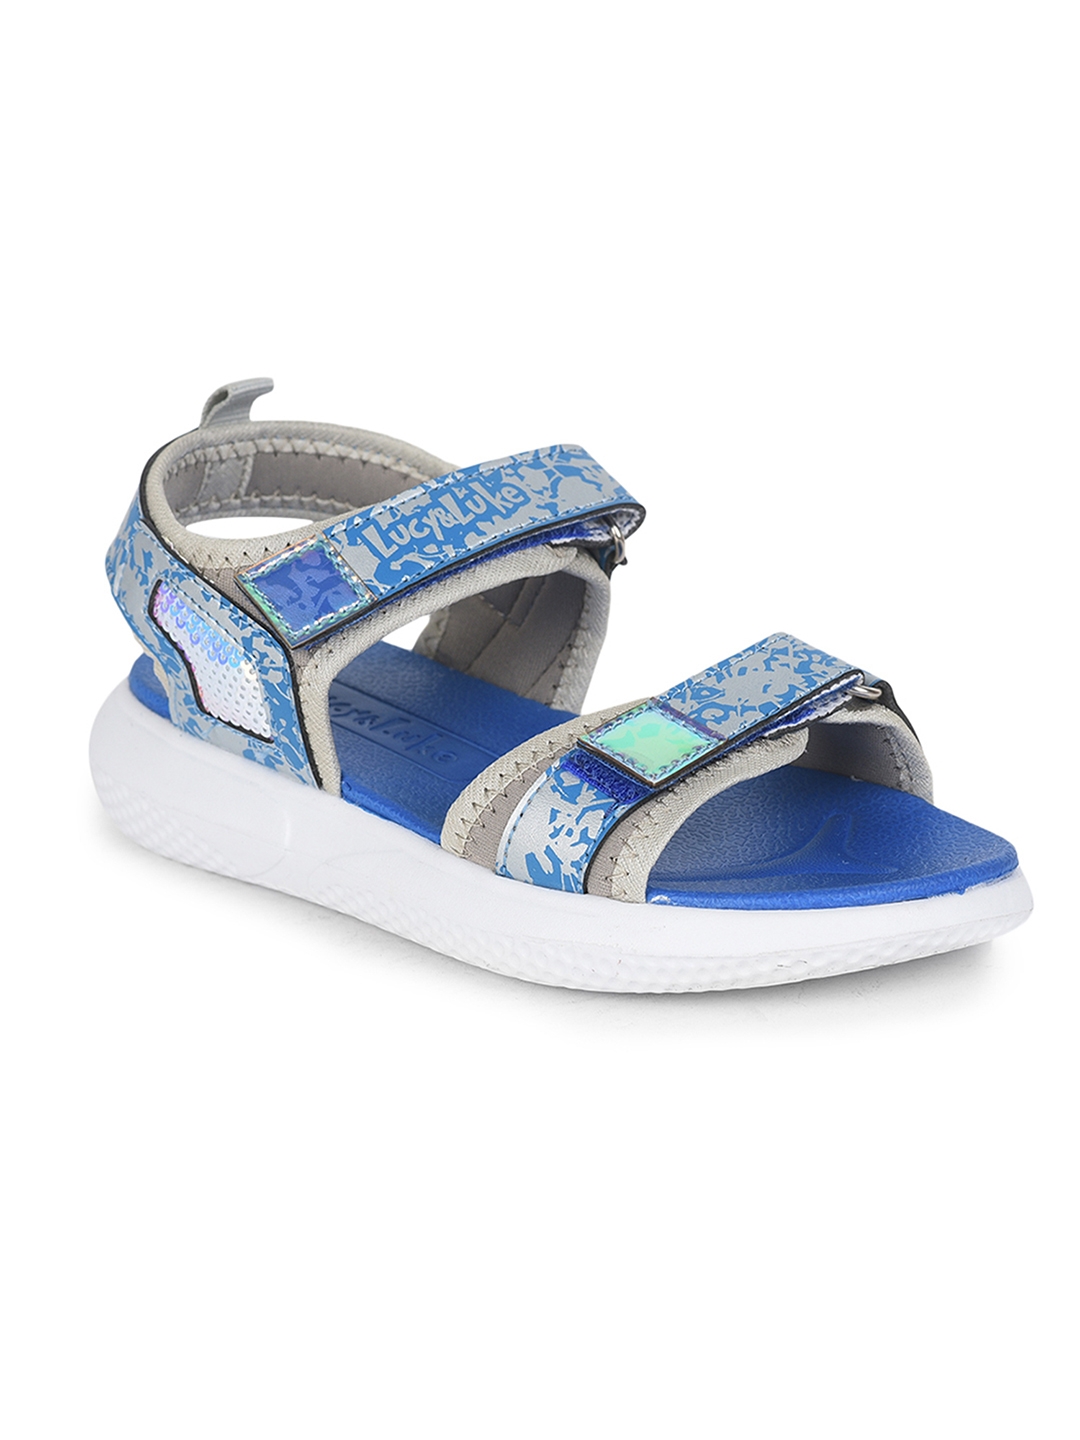 Liberty | Lucy & Luke by Liberty Sandal HIPPO-10 For :- Kids